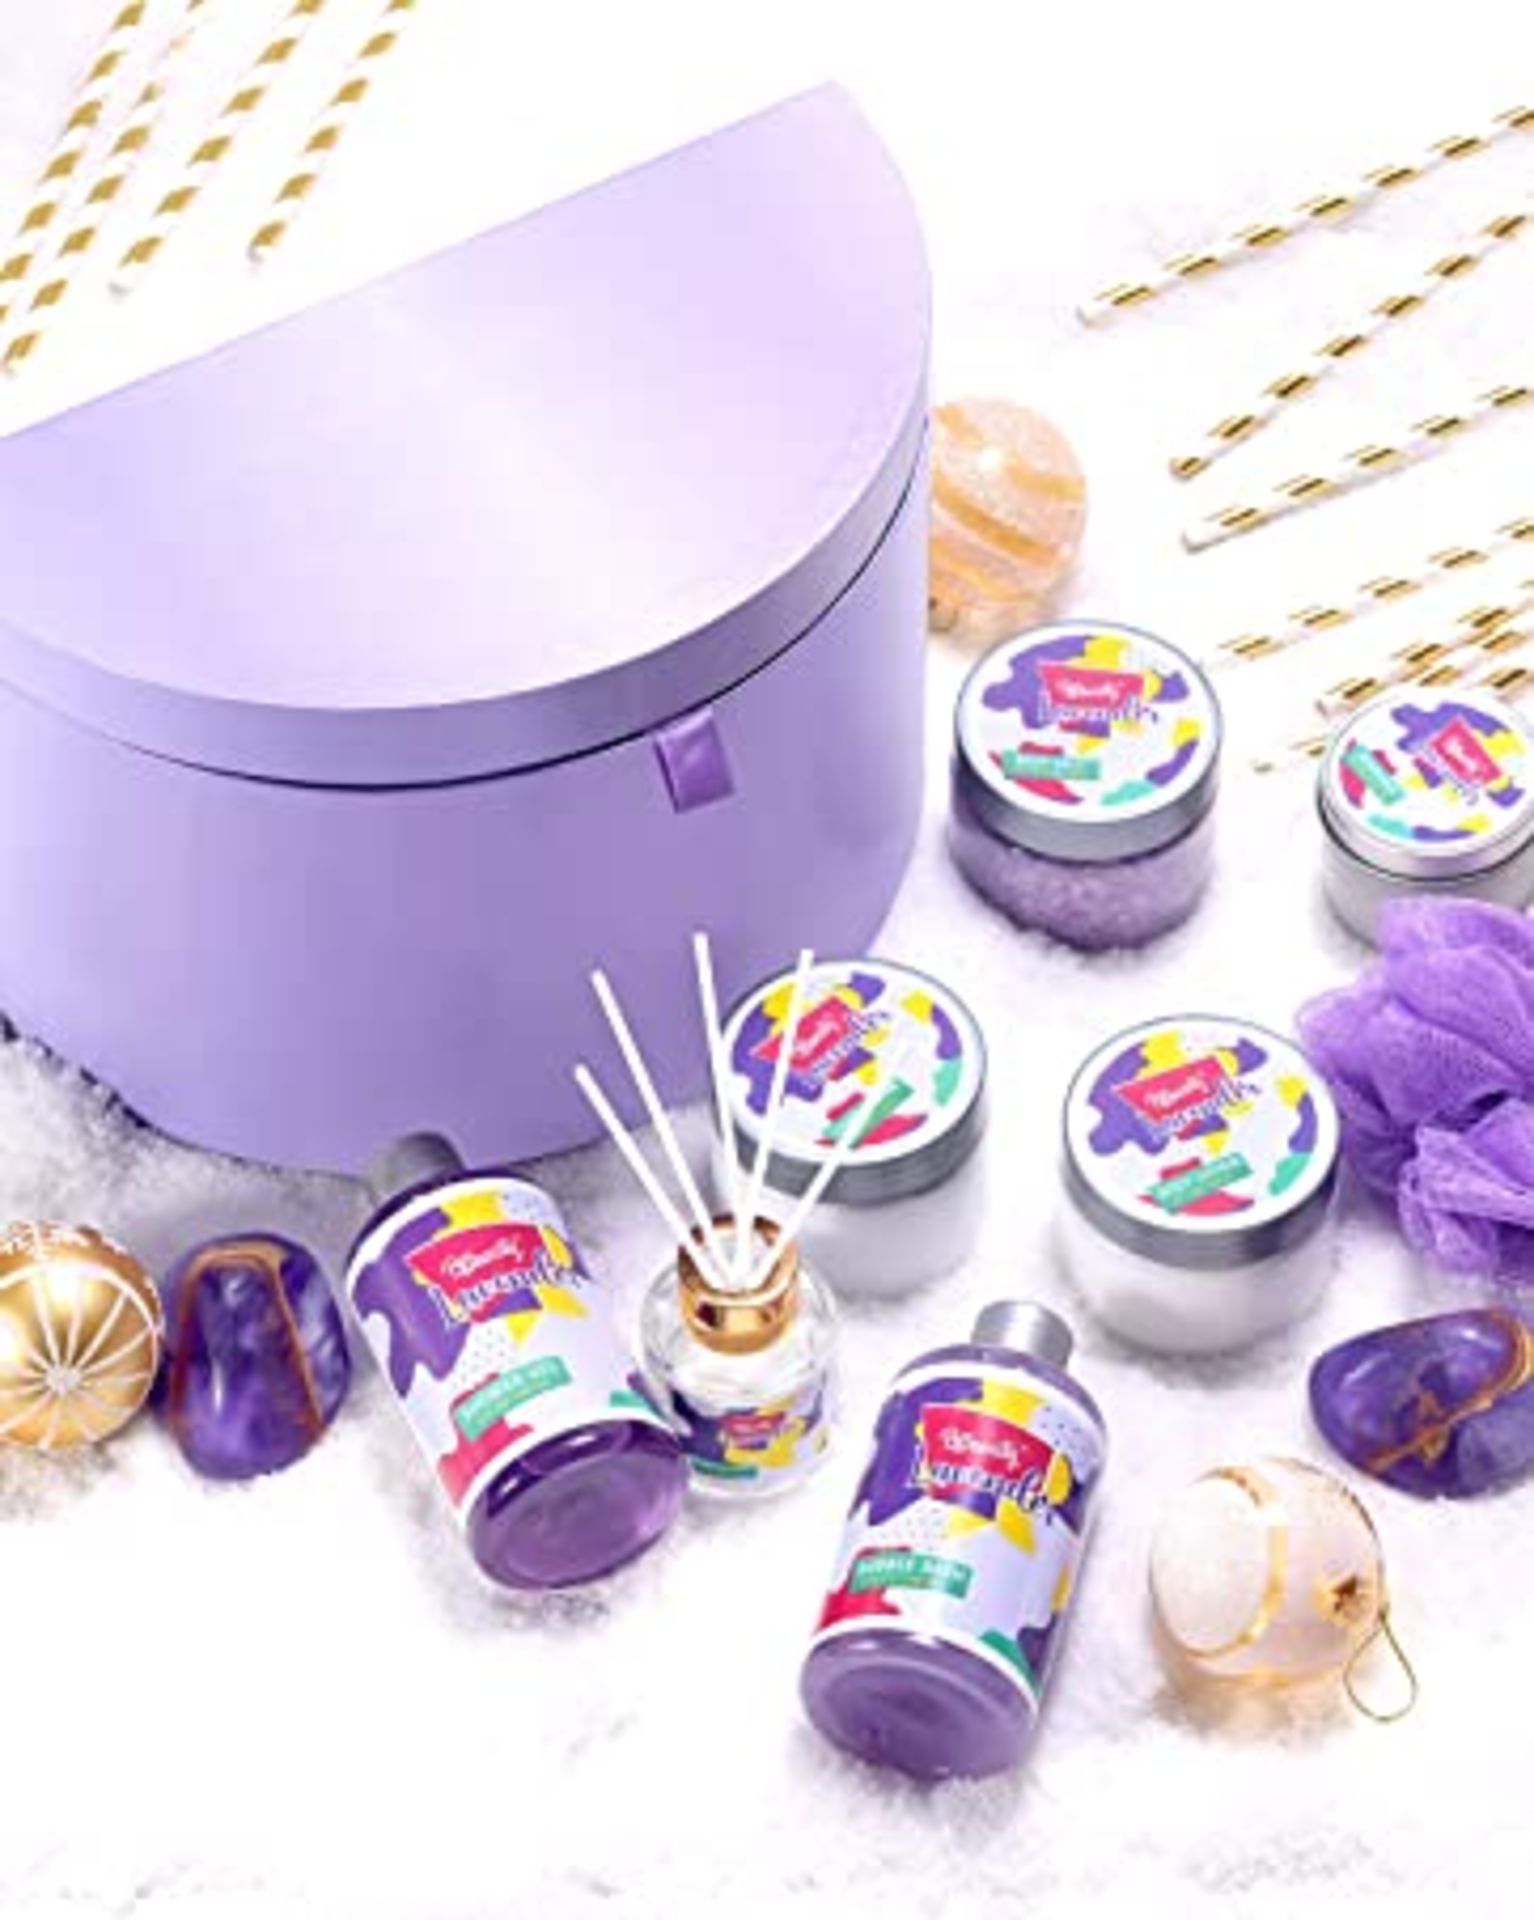 New Packaged Lavender Bath & Shower Jewellery Box. RRP £44.99 Each. 10 Pcs - Image 2 of 2